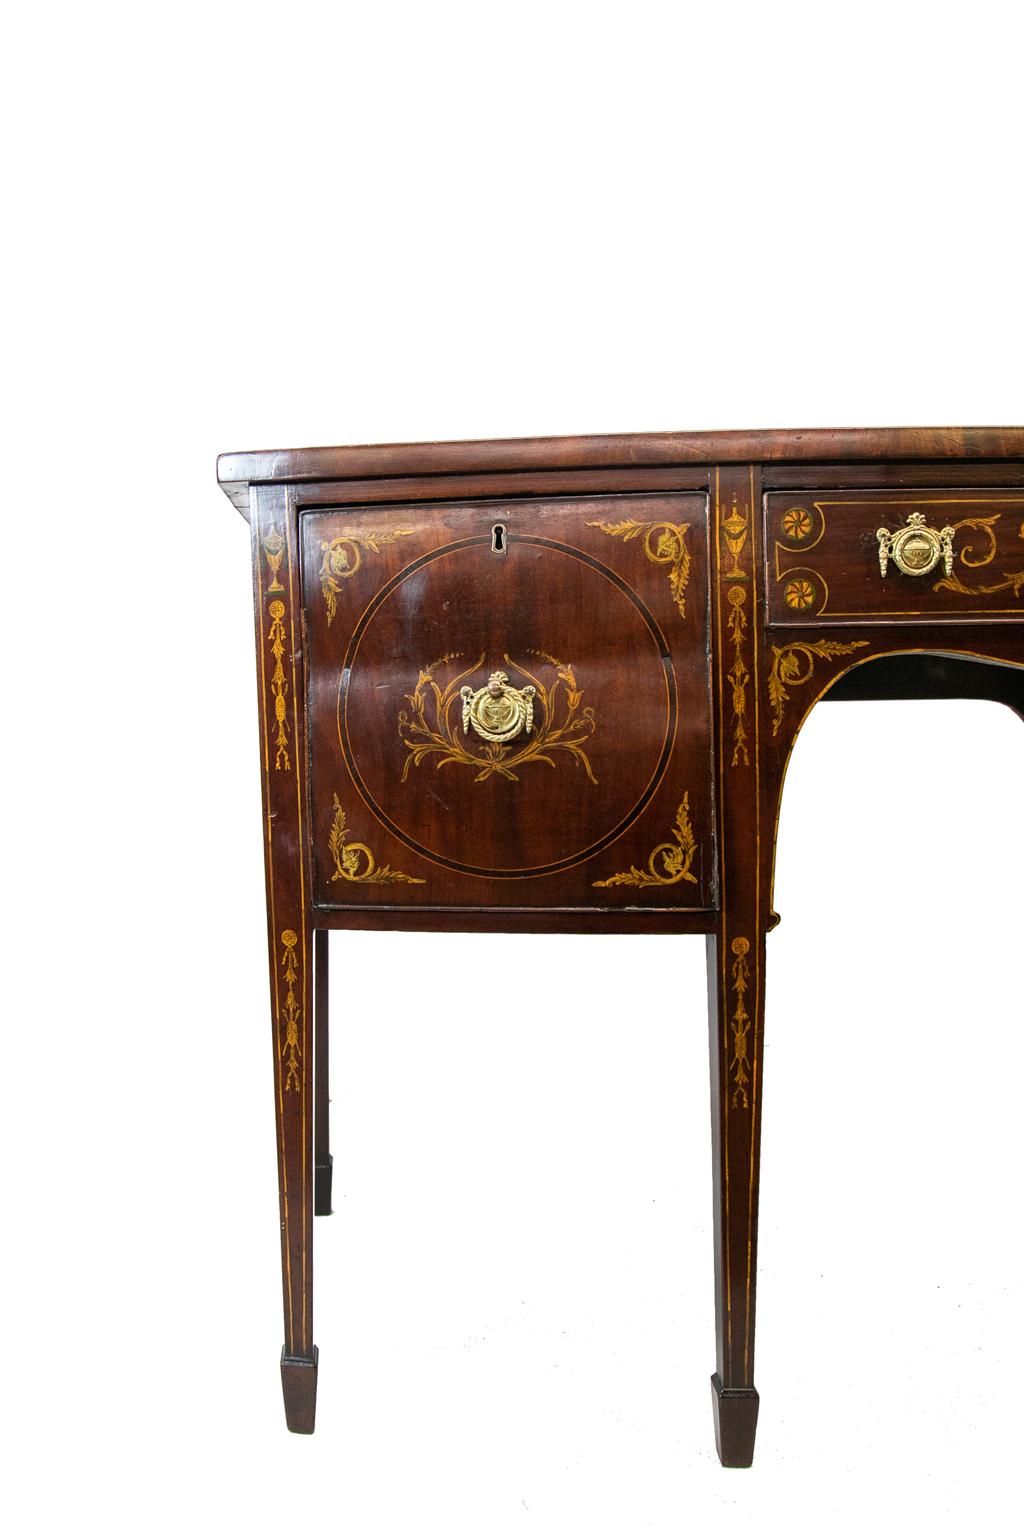 English Inlaid mahogany Hepplewhite sideboard, the top lavishly inlaid with classical urn, floral arabesques, and ribbons. The front is also inlaid with urns. The drawers retain the original keys.
  